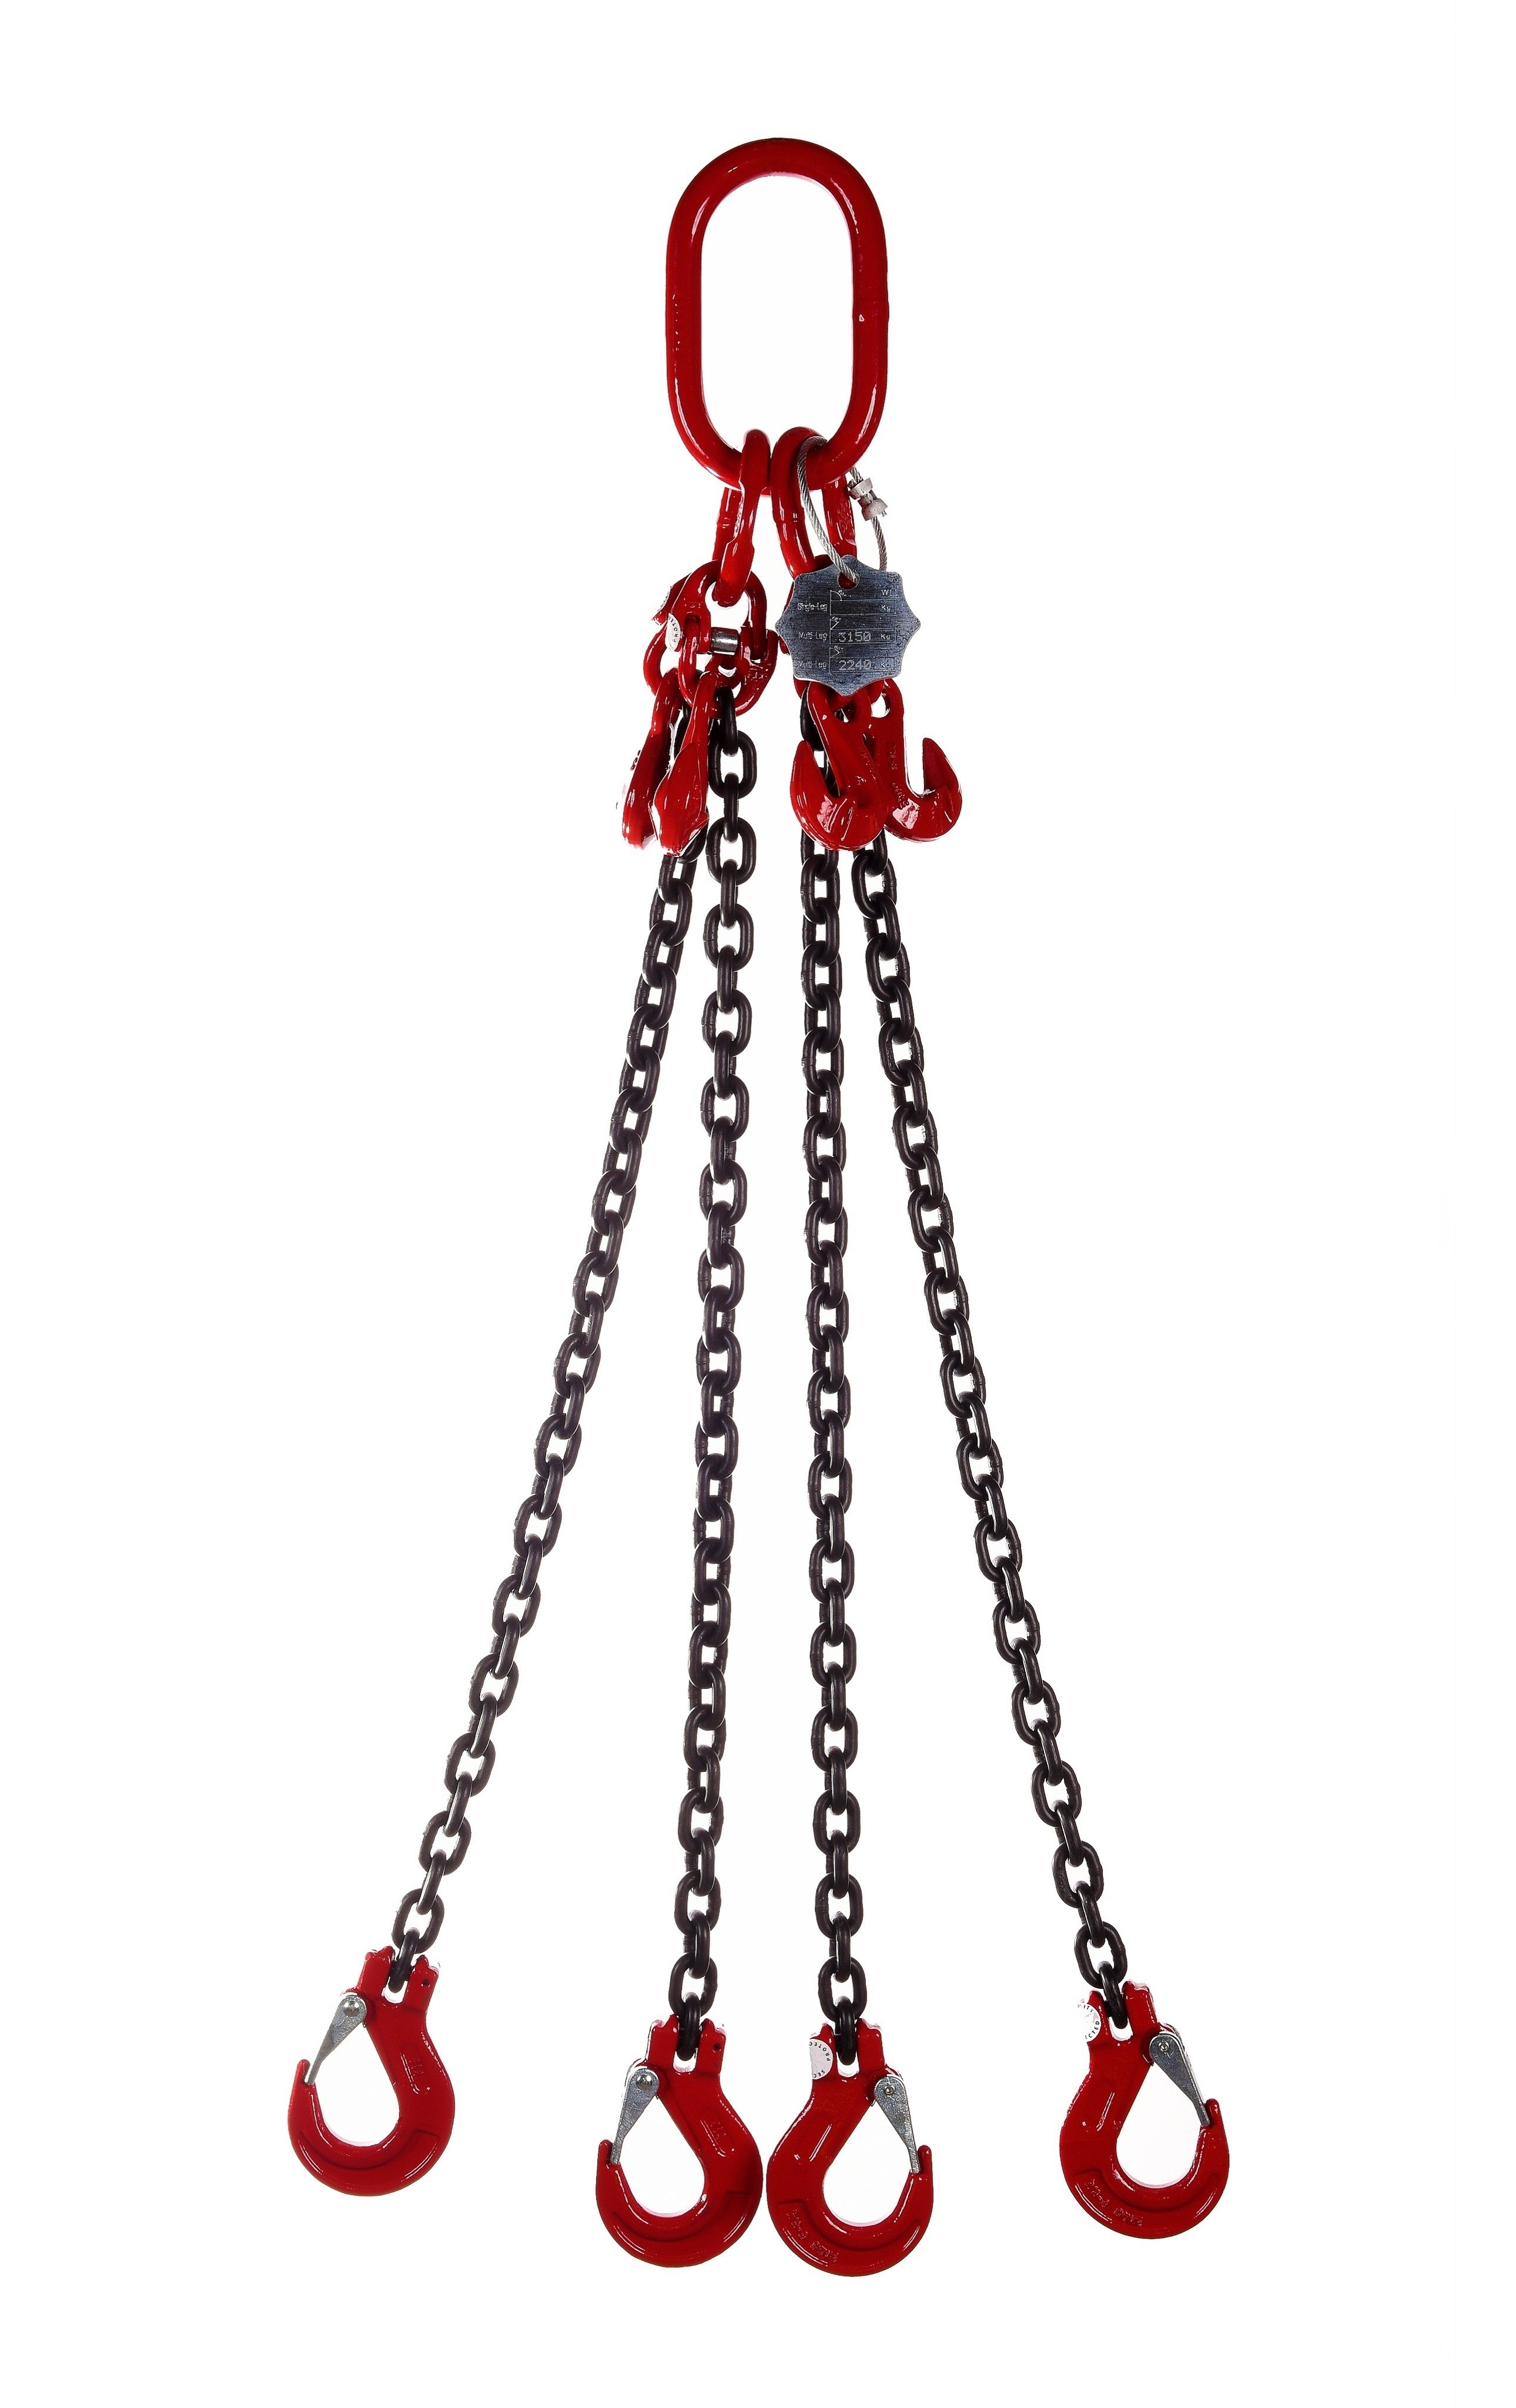 4 Leg 17.0tonne 16mm Lifting Chain Sling with choice of length and hooks – With Shortening Hook – 2mtr – Clevis Sling Hook – Chain Slings – WSB